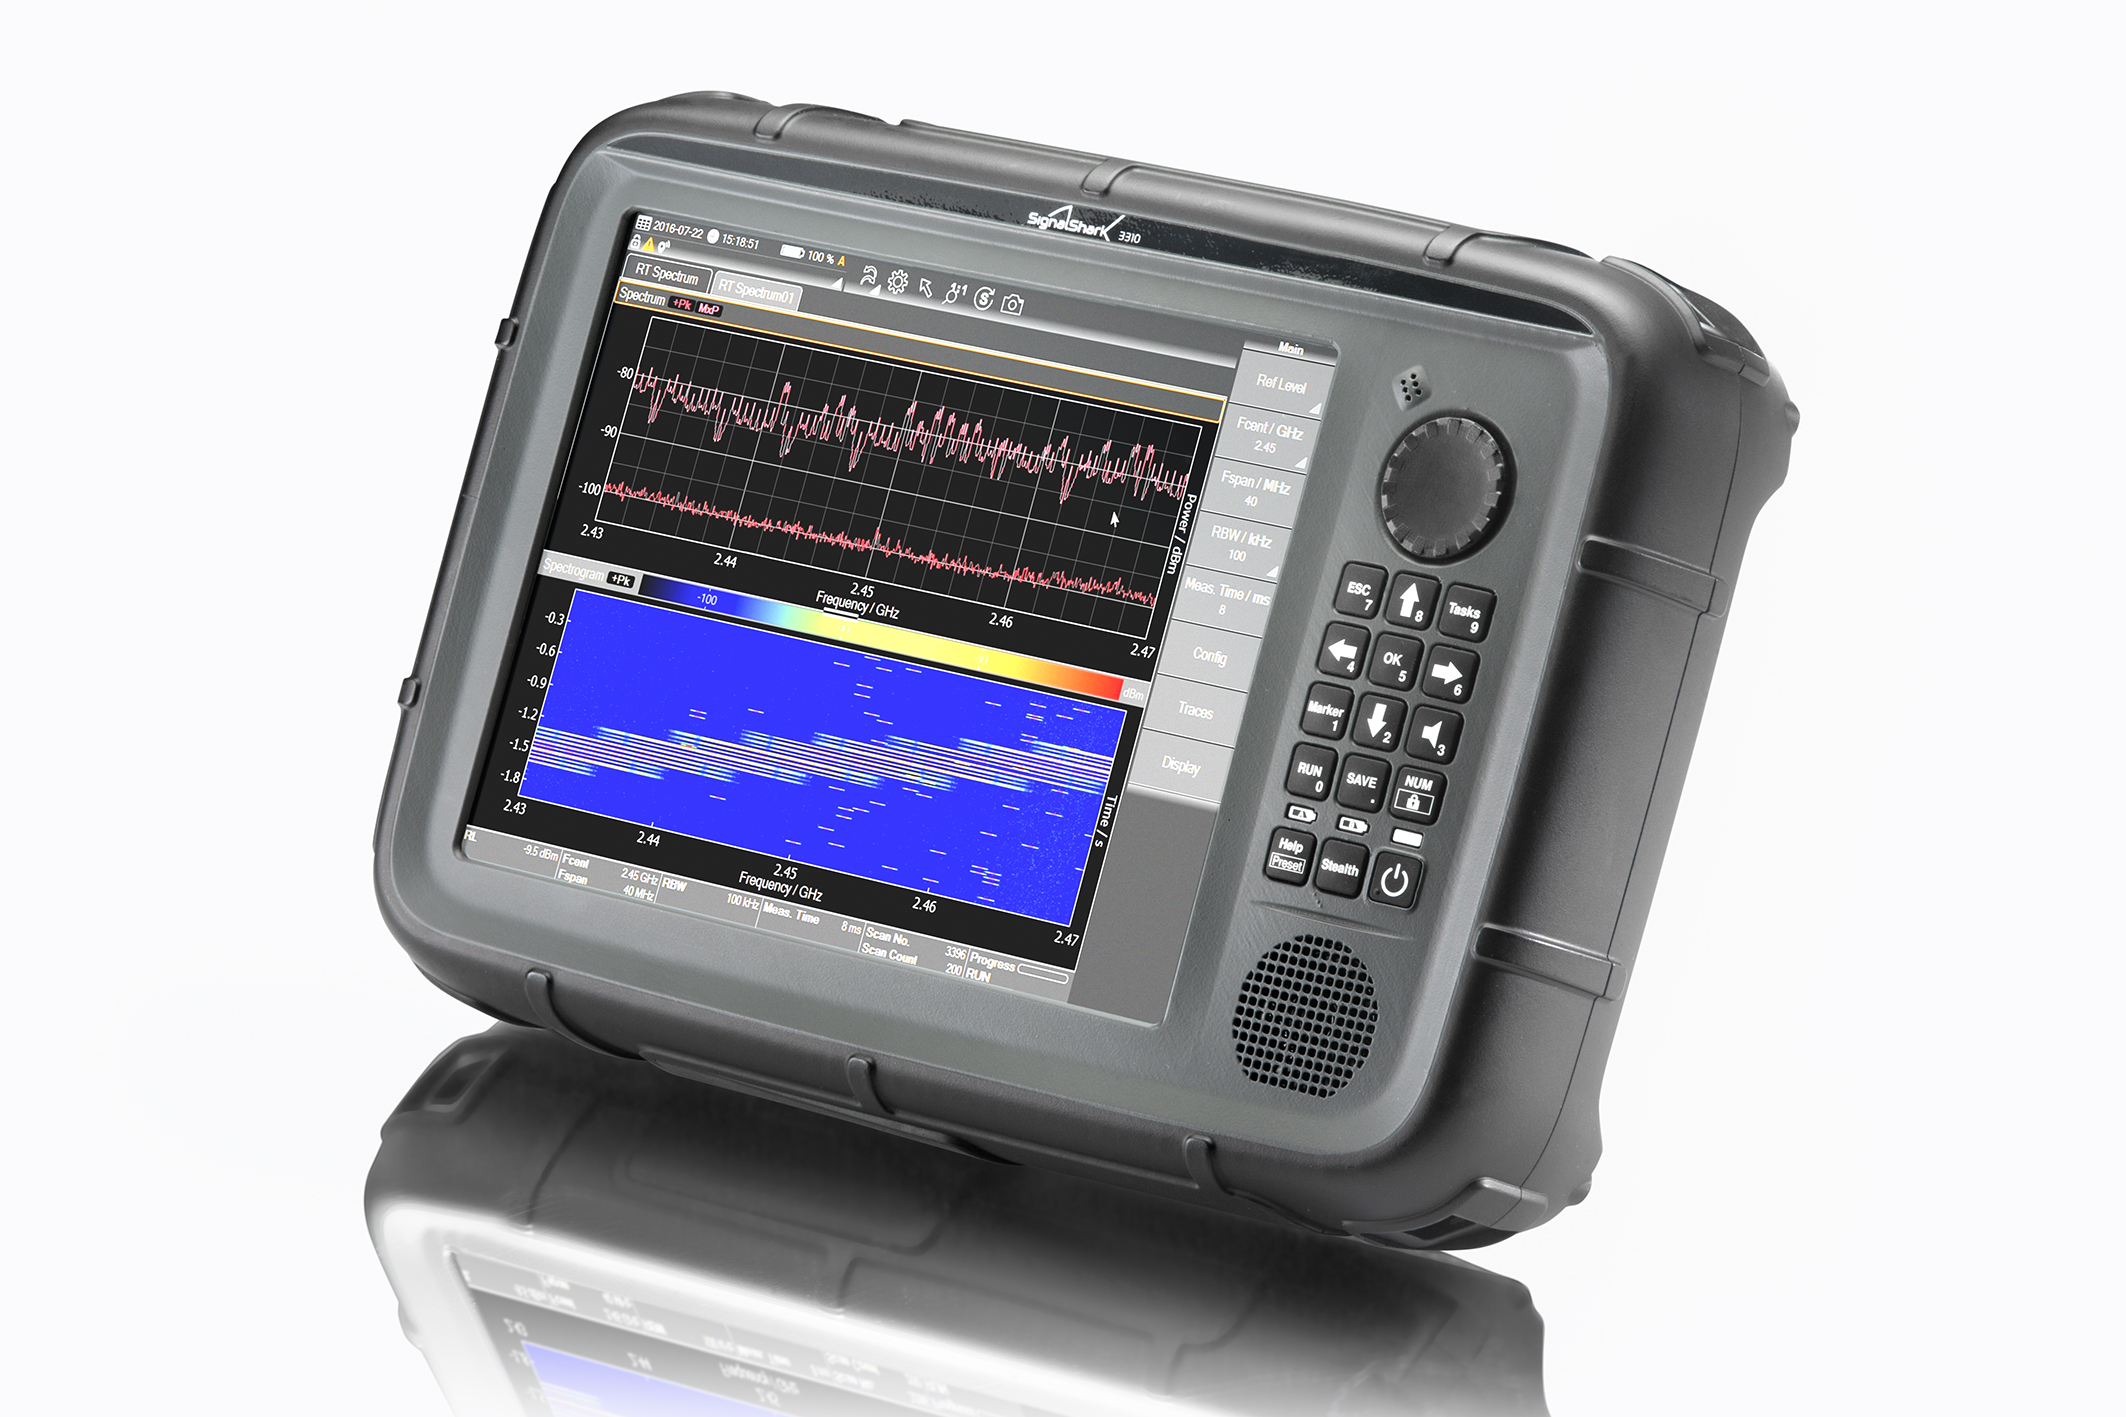 The SignalShark IQ recorder script allows for WAV format recording on devices like the SignalShark 3310.